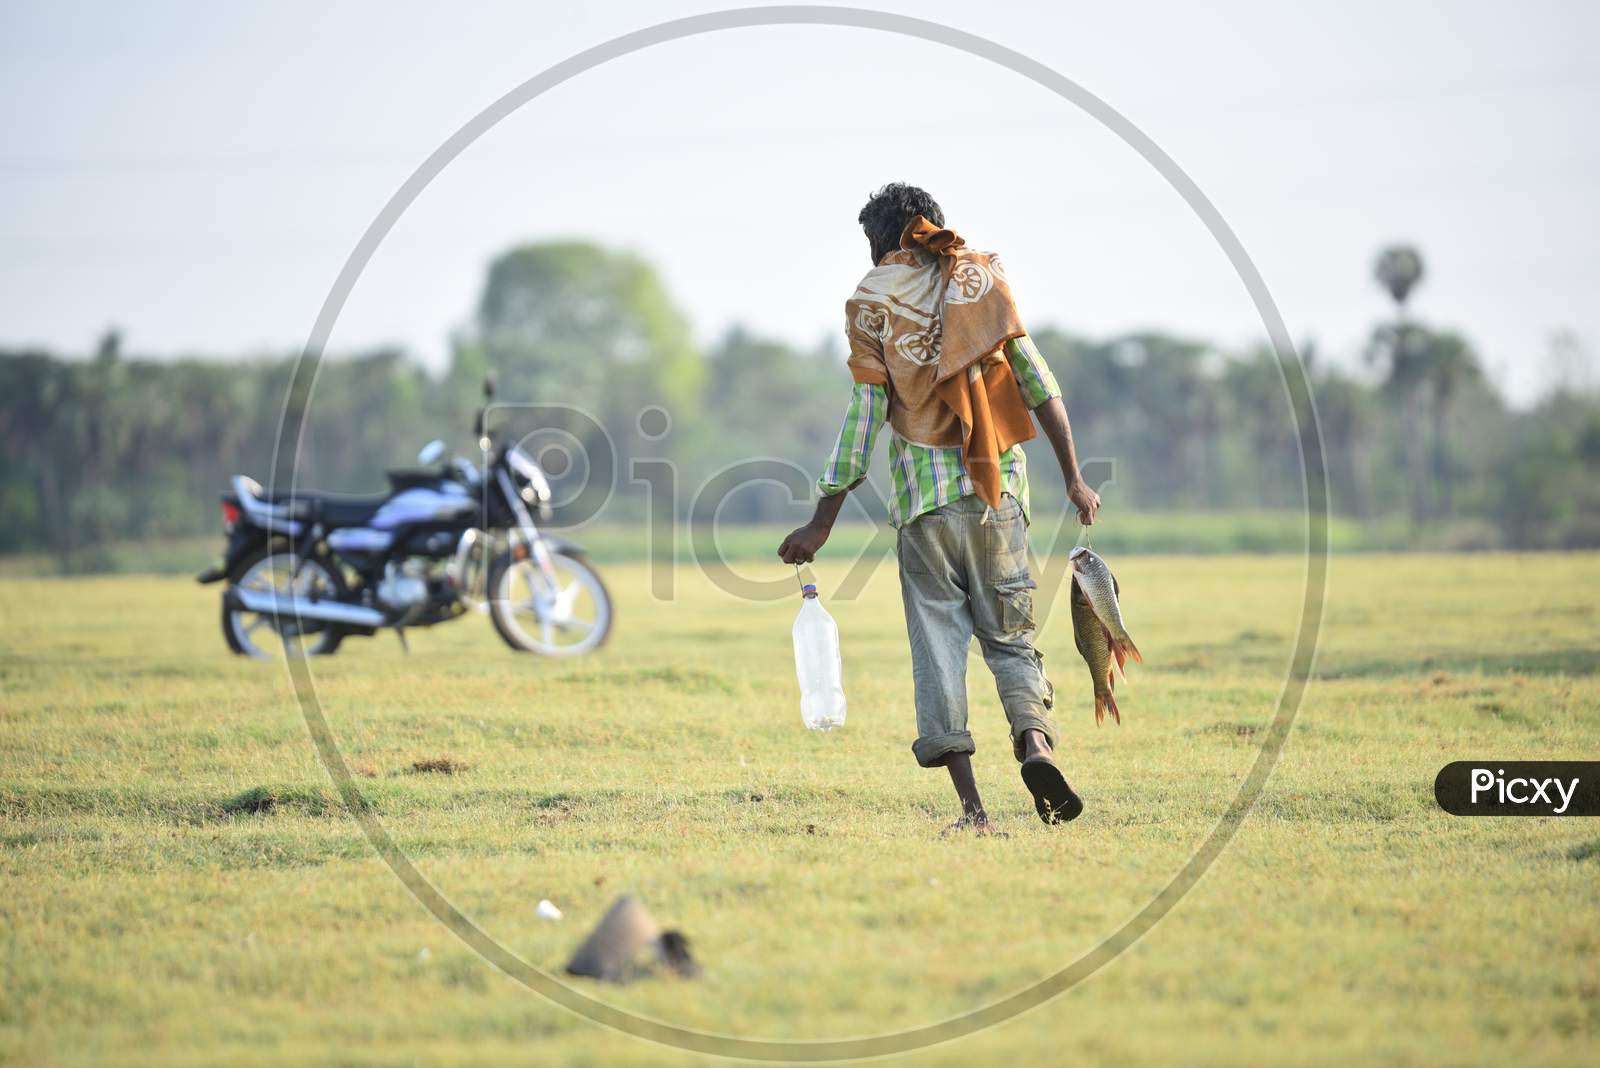 A man carries fish catch from a pond, may 13, 2020.